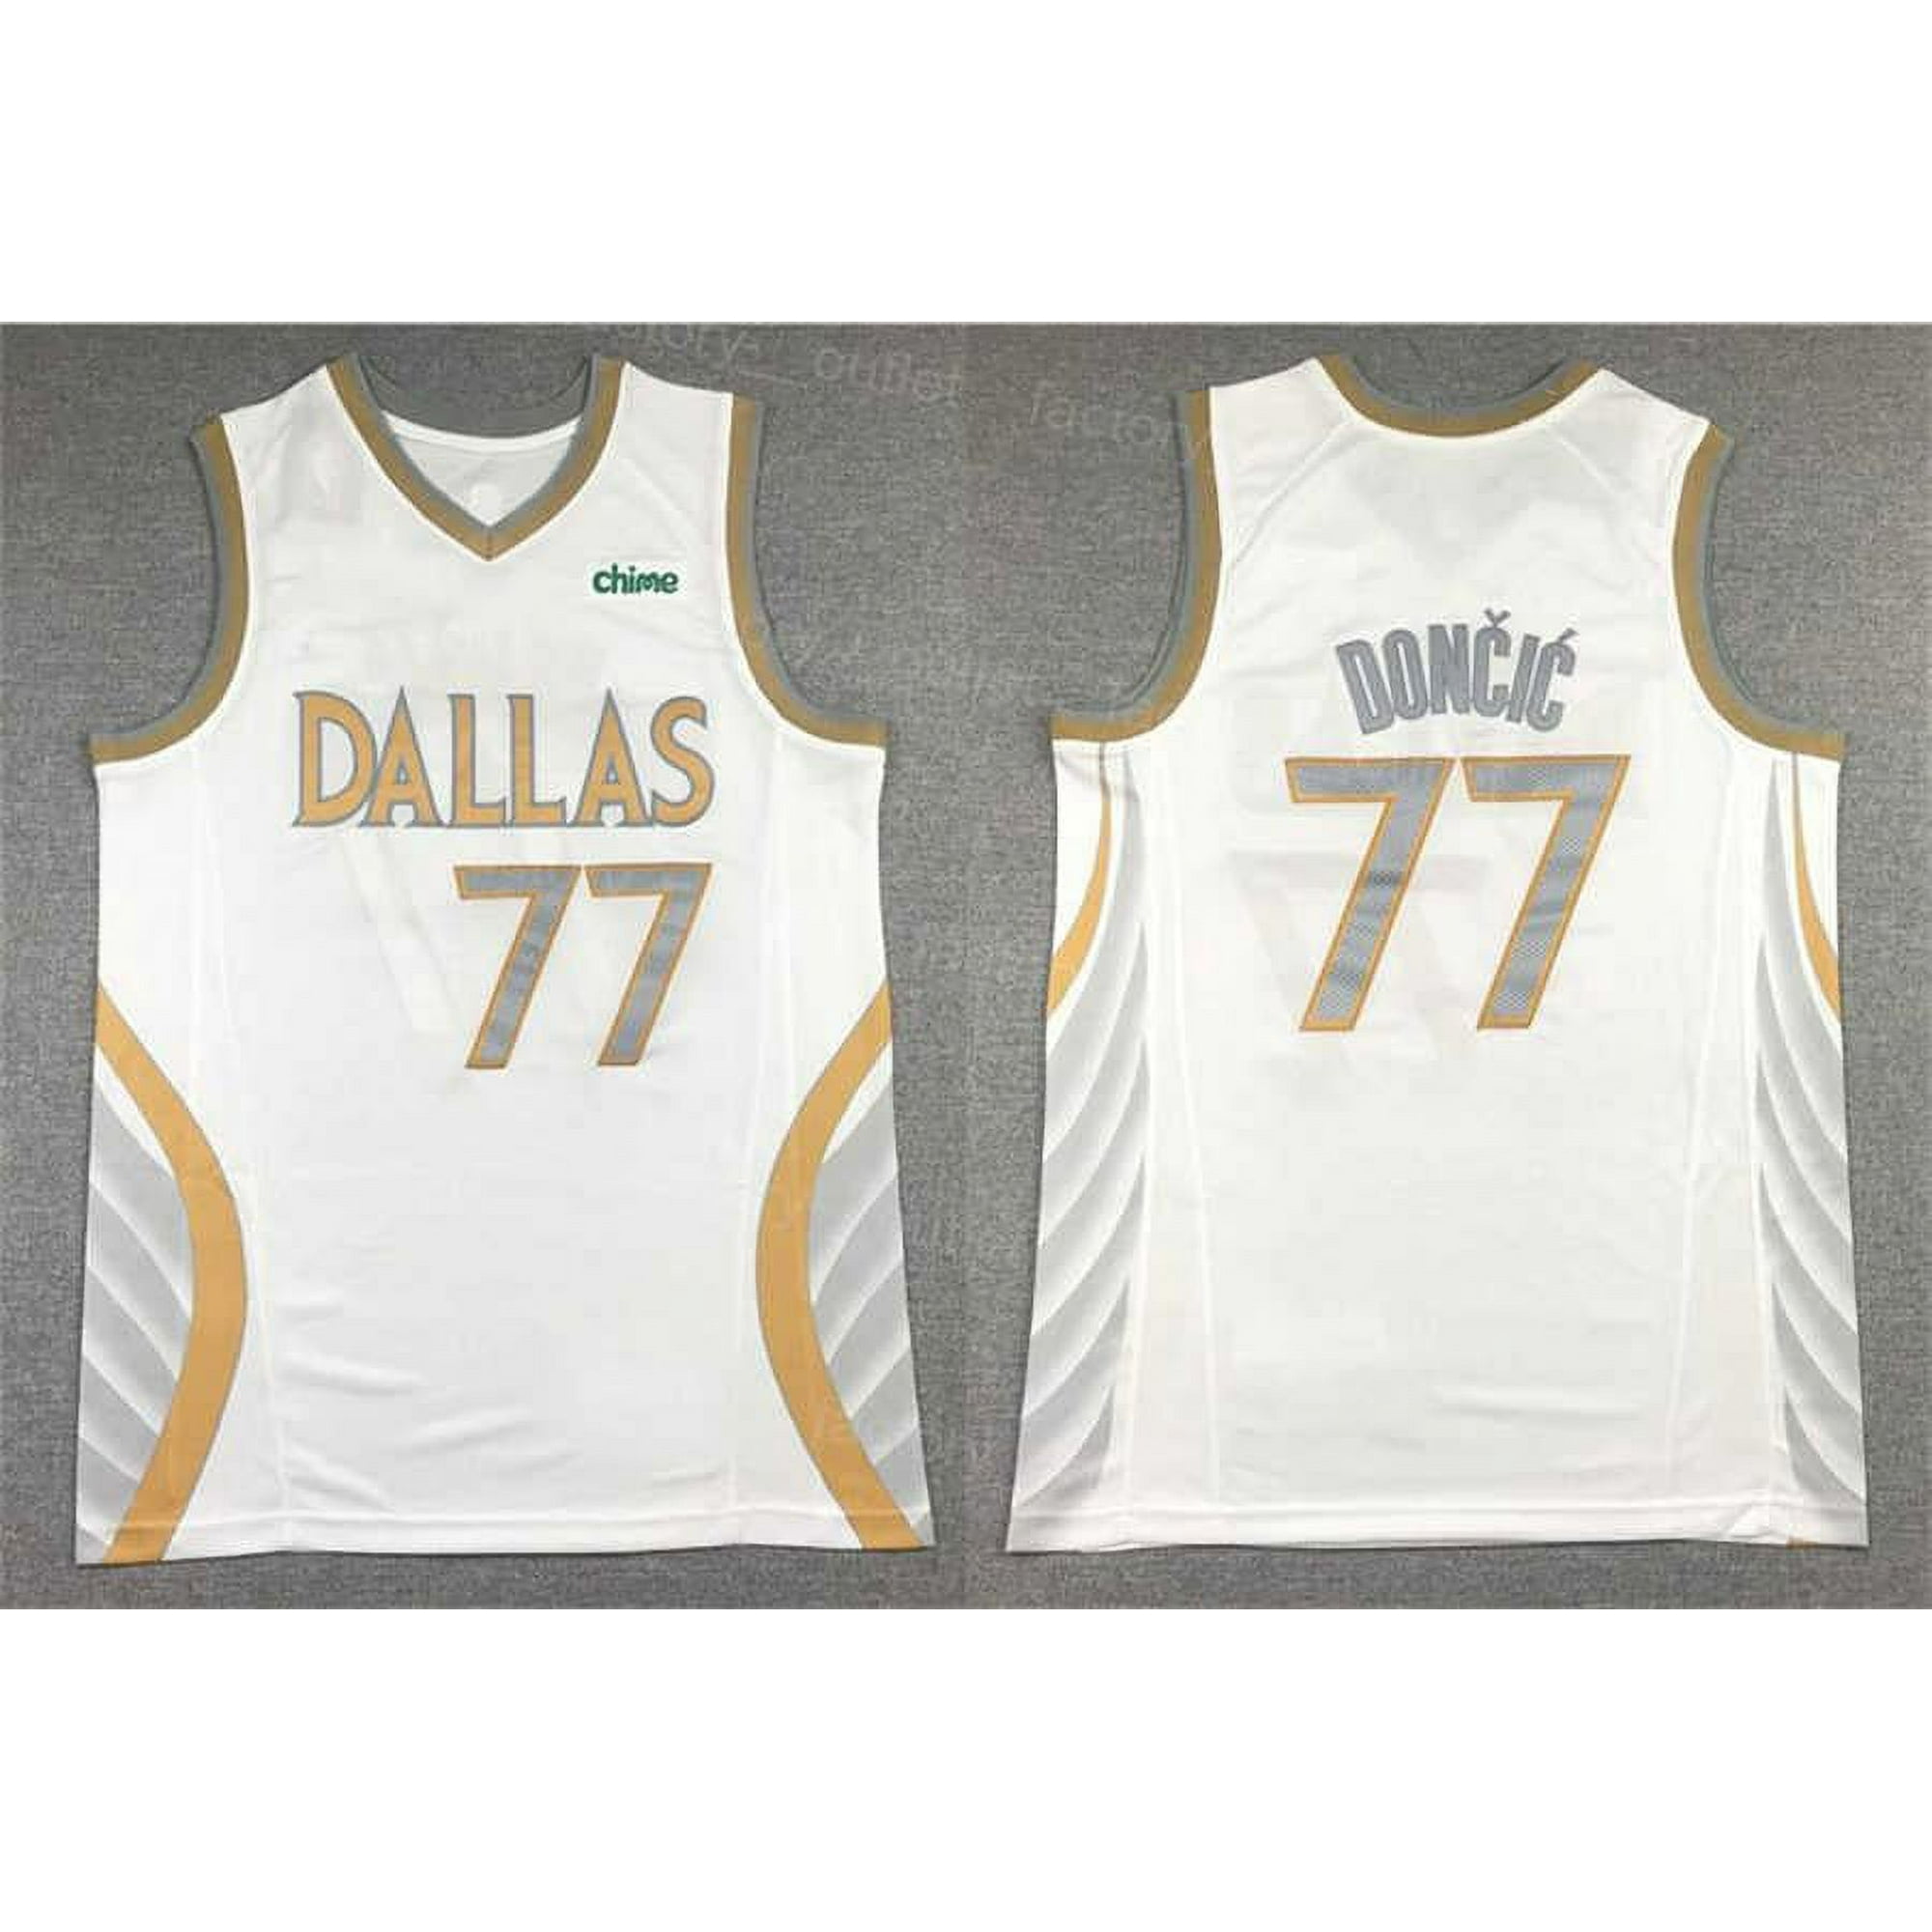 luka doncic jersey chime